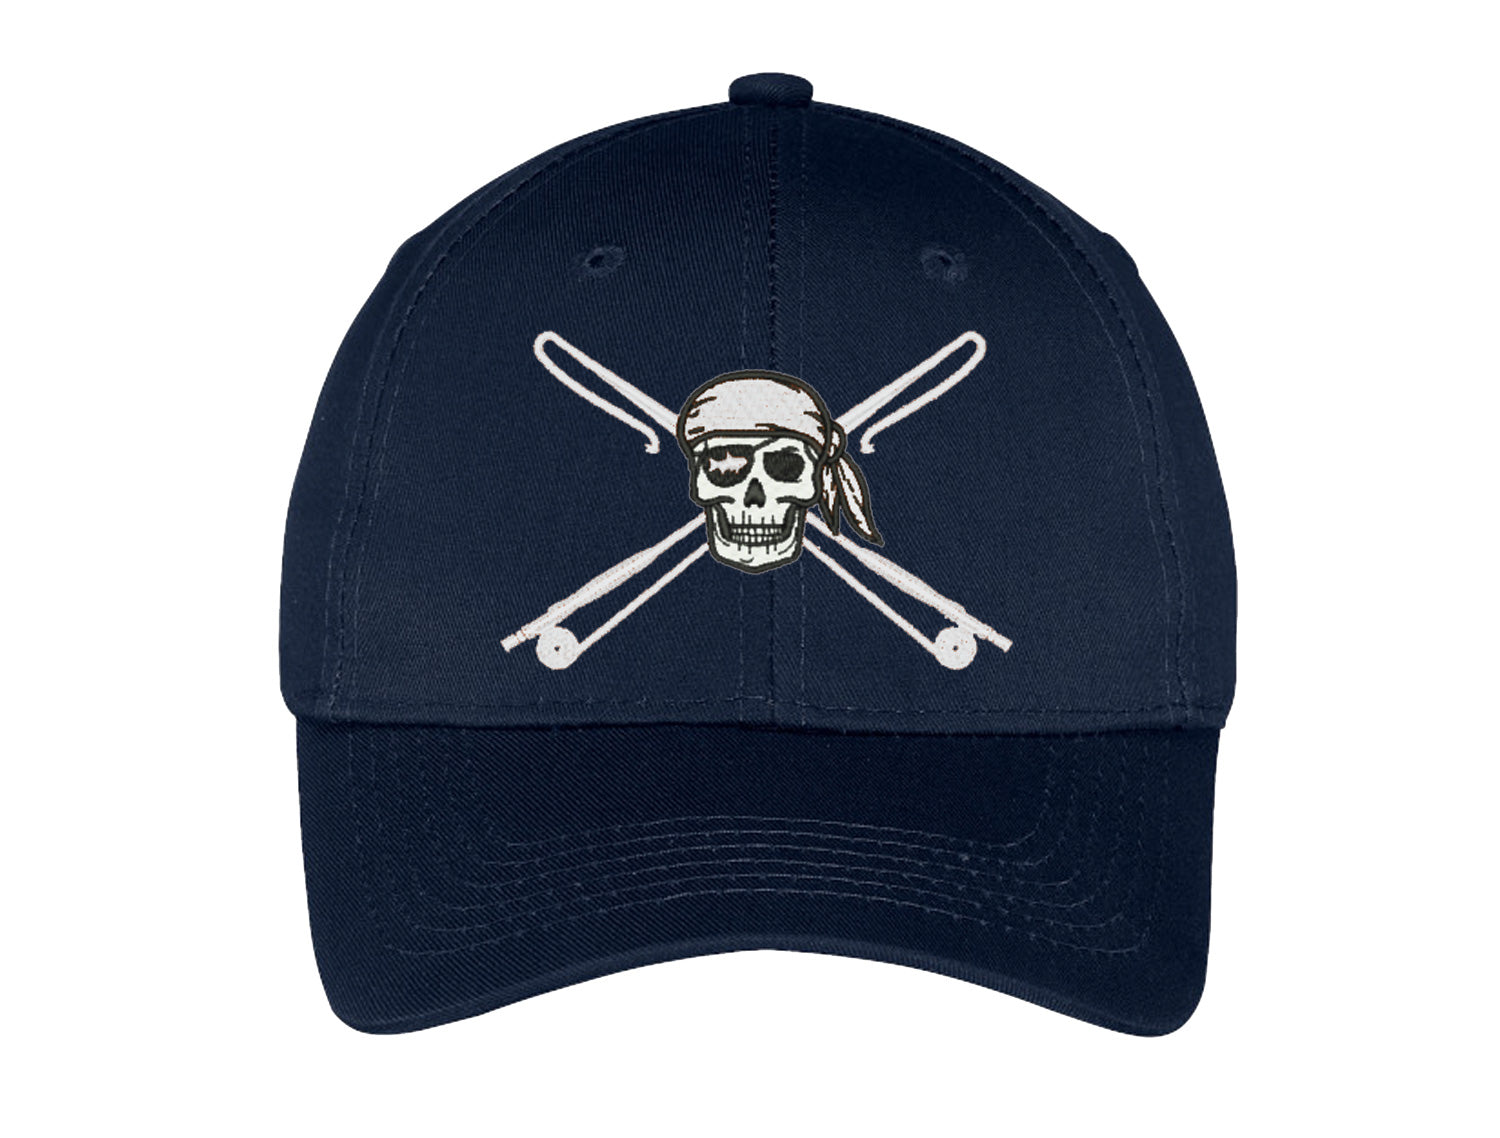 Youth Fishing Hats with Reel Fishy Pirate Skull & Rods Logo - Navy